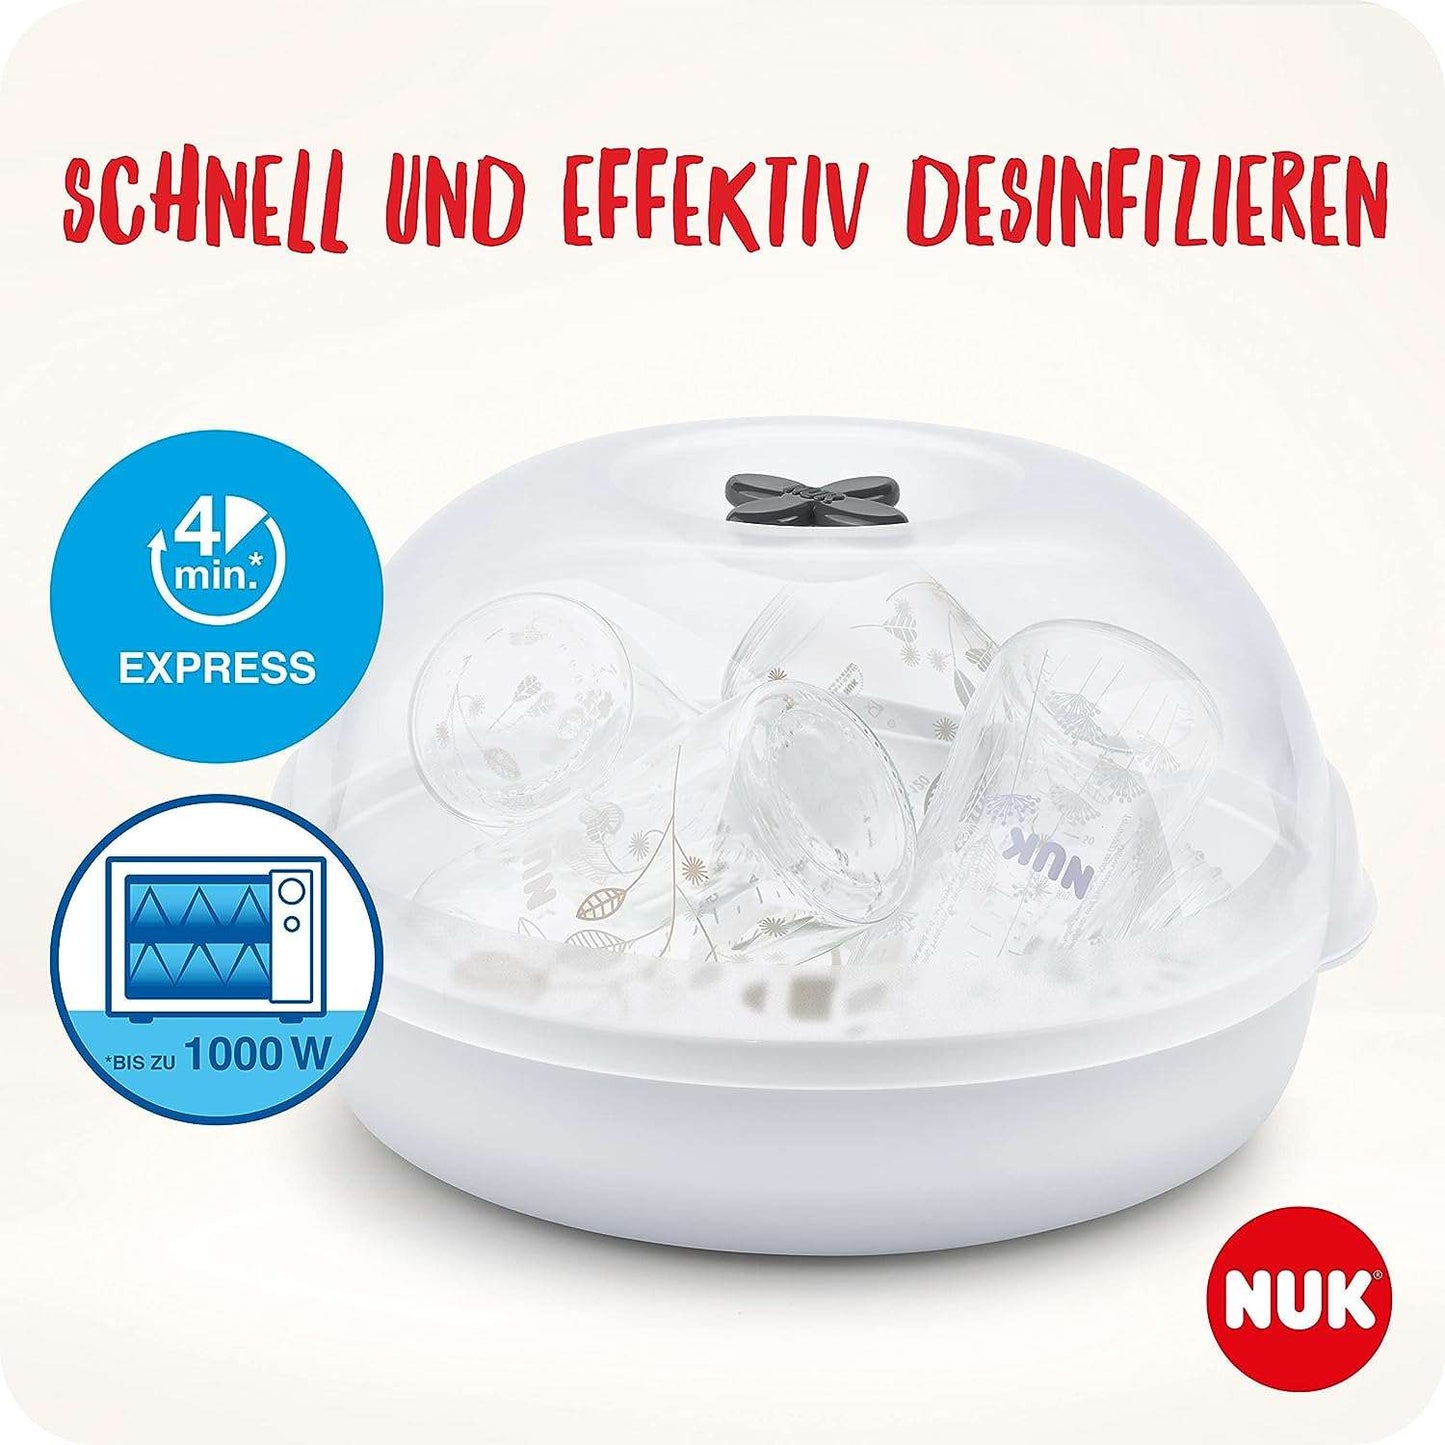 NUK - Micro Express Plus microwave sterilizer for baby bottles